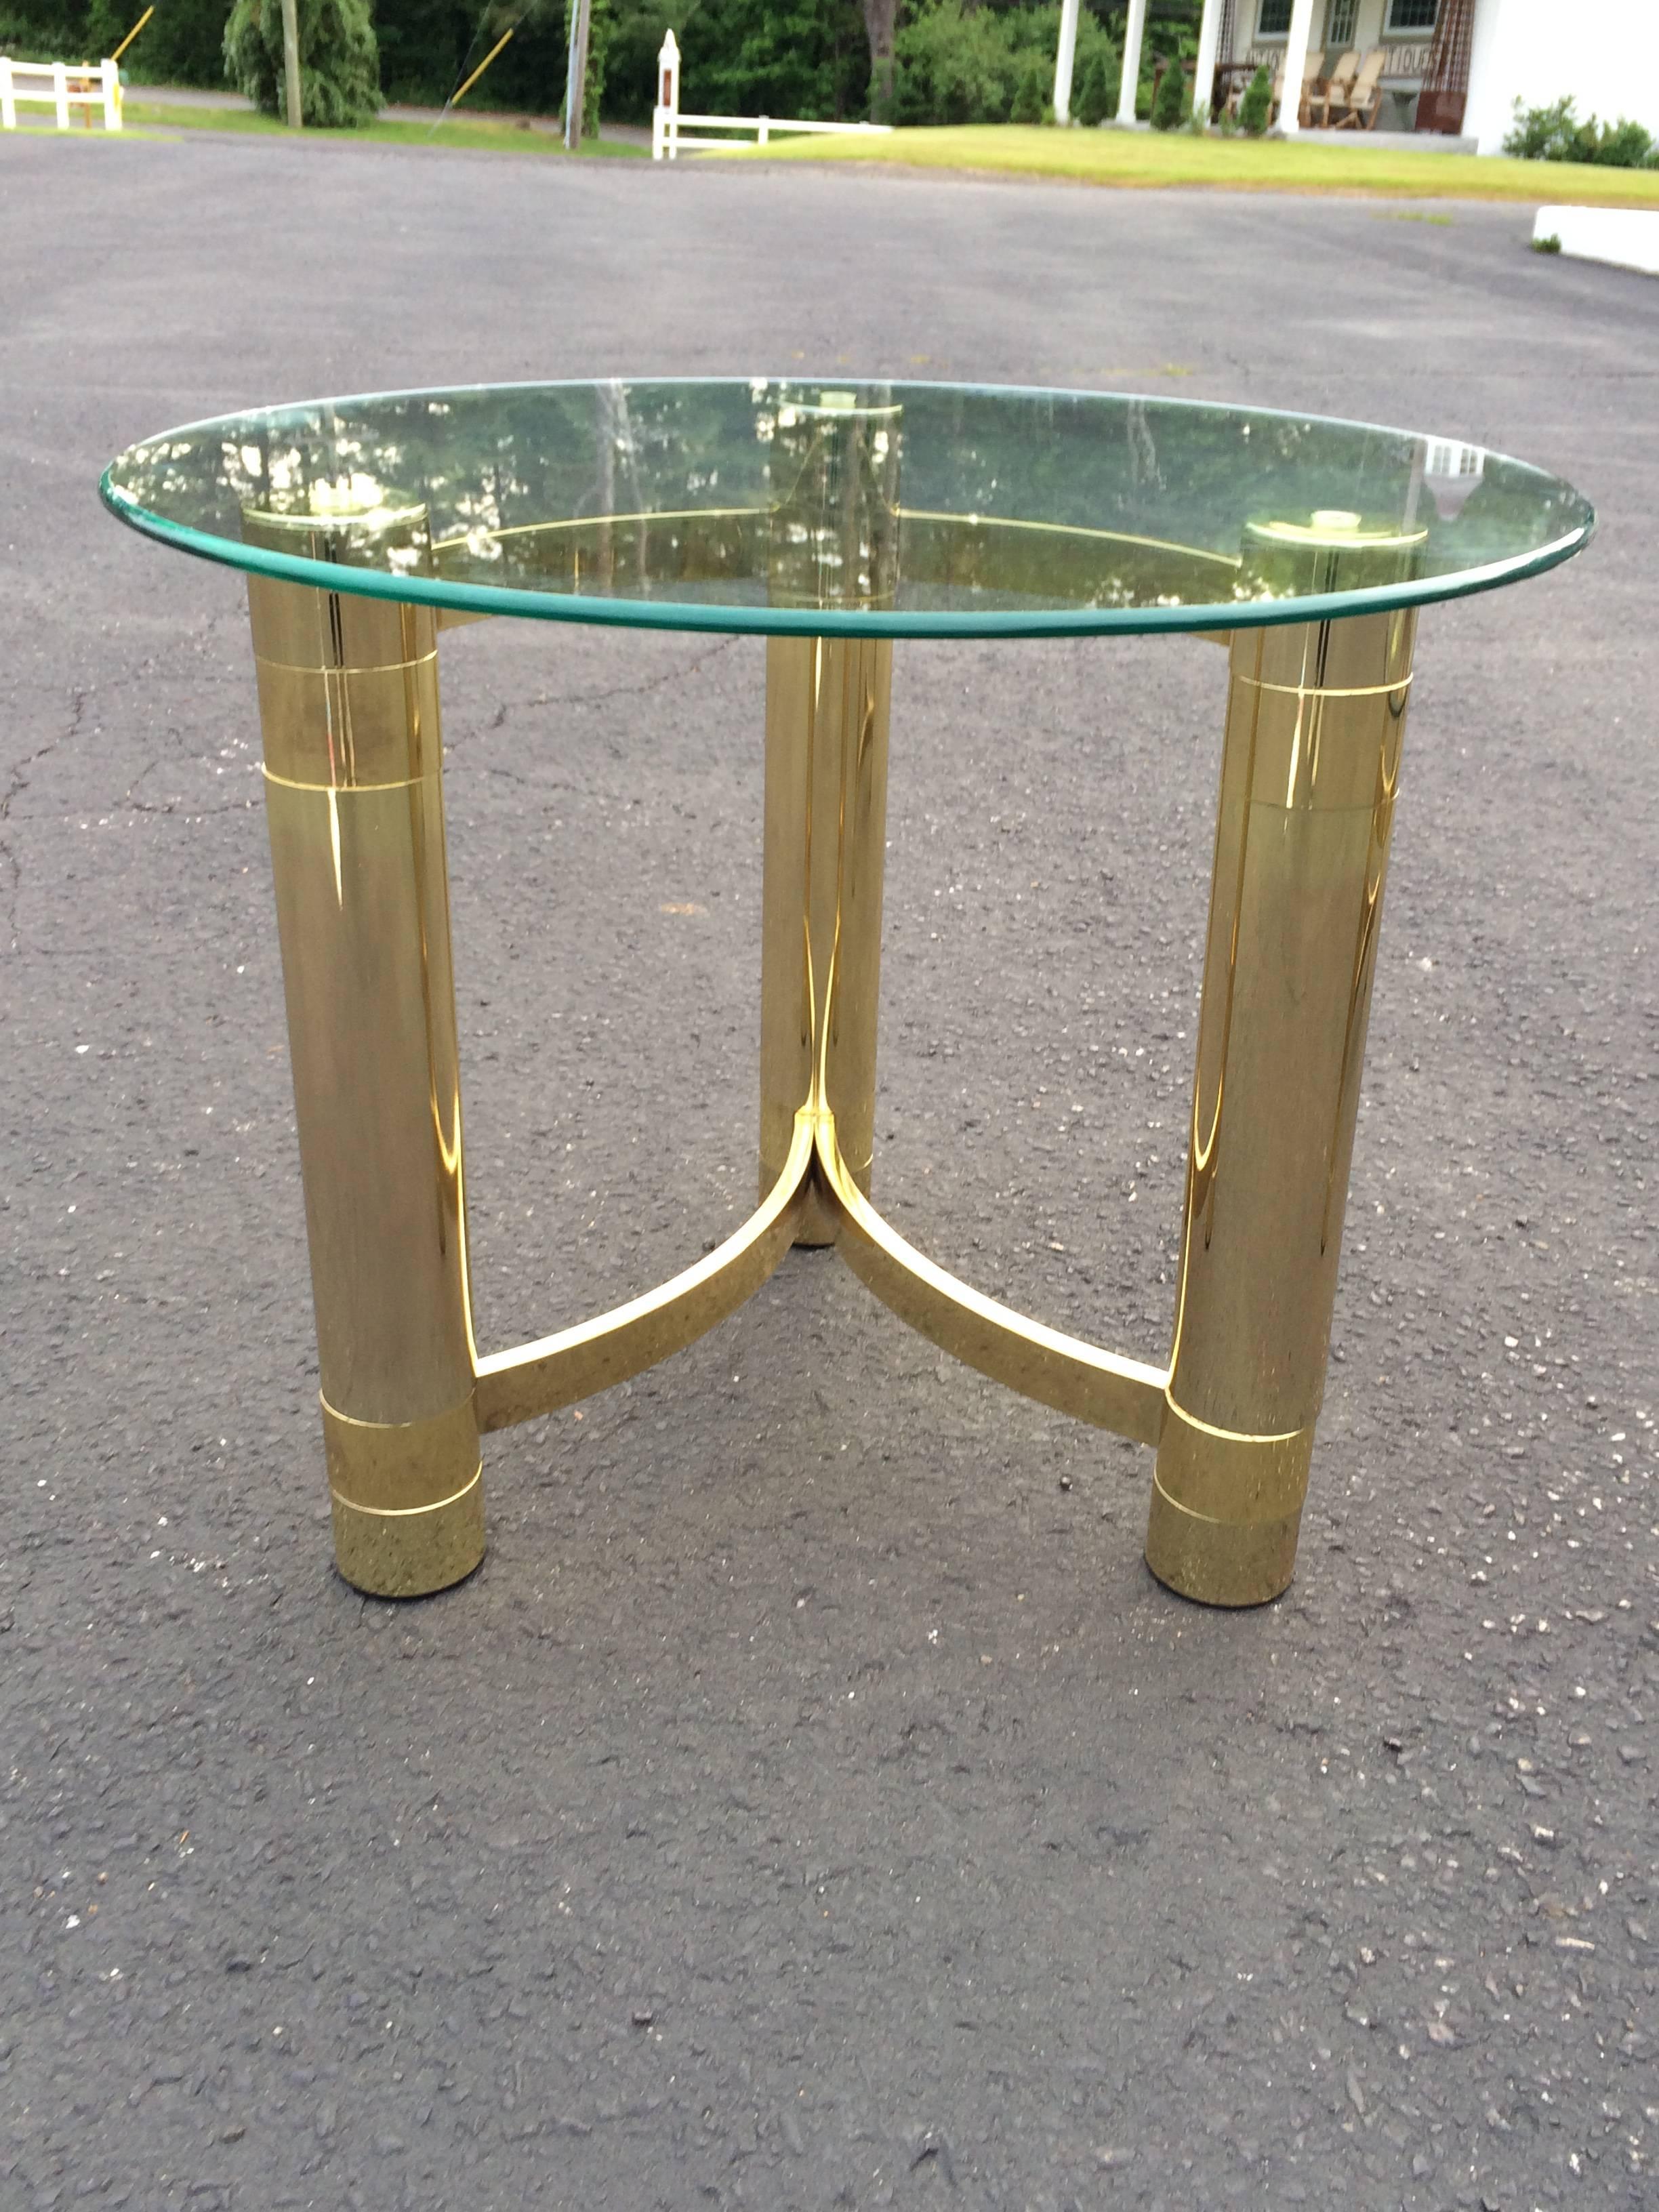 Hollywood Regency brass and glass side table. Simple organic , clean lines. Matching coffee table has already sold.